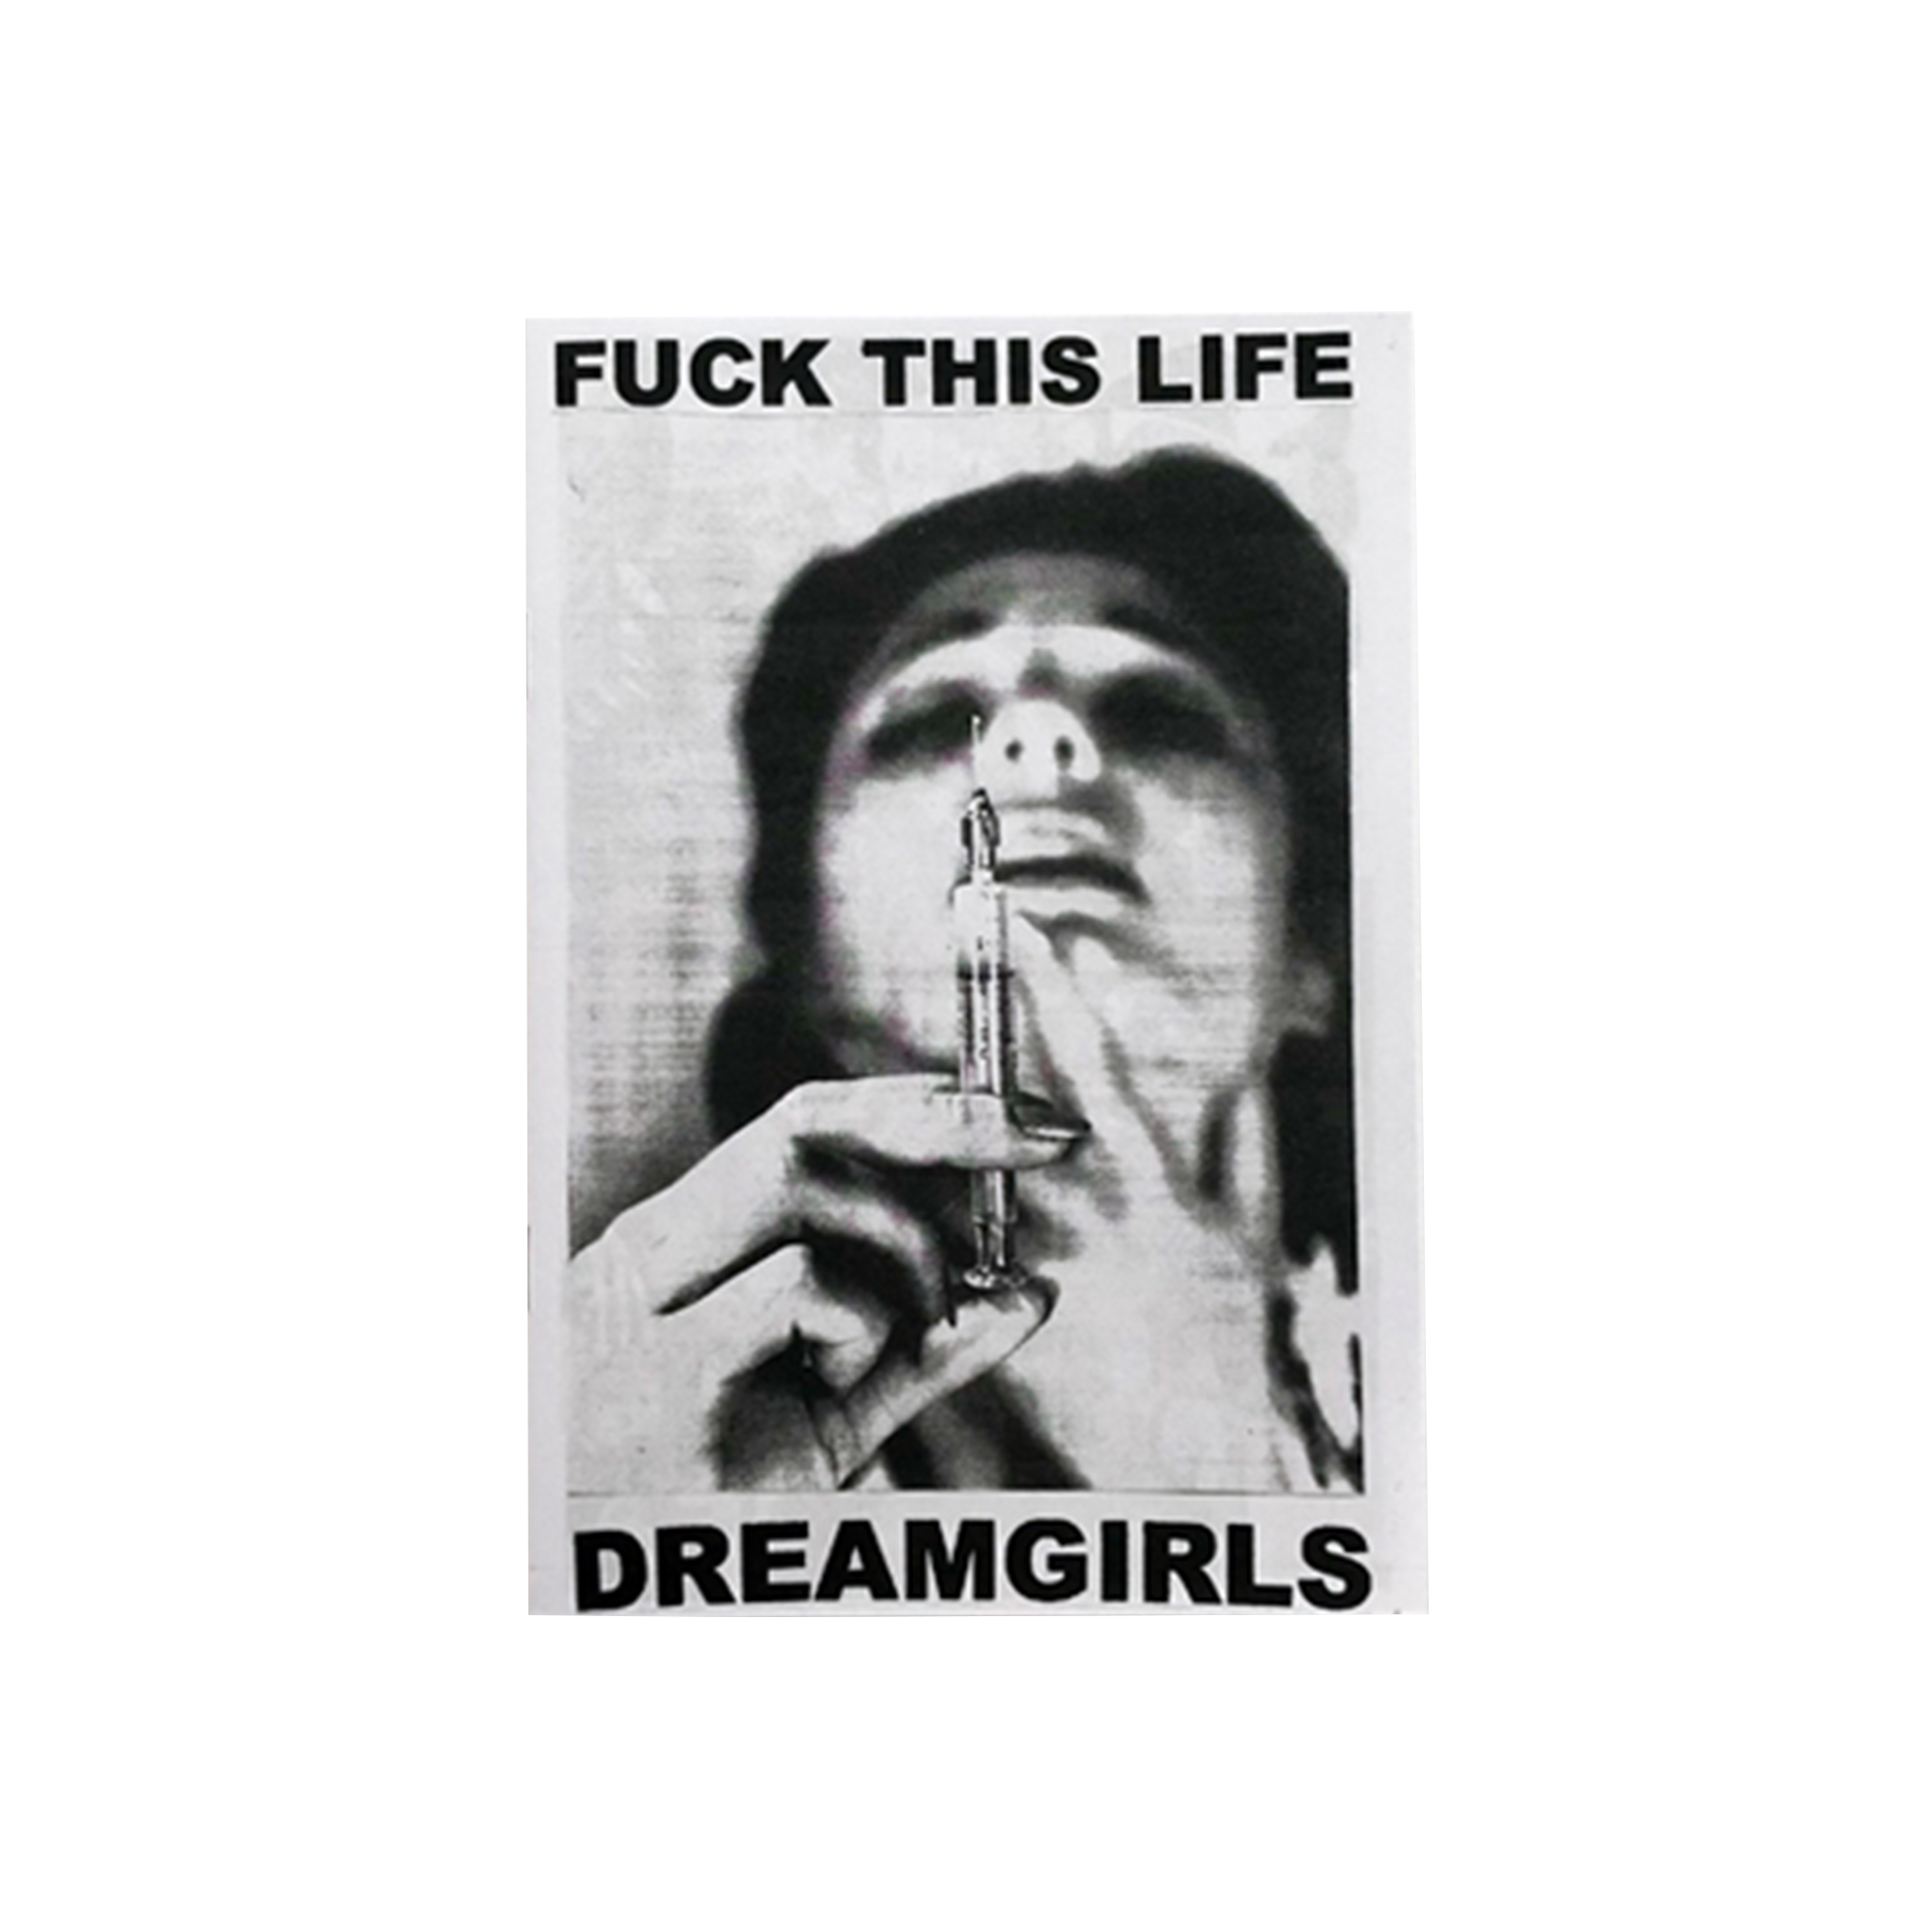 FUCK THIS LIFE - DREAMGIRLS